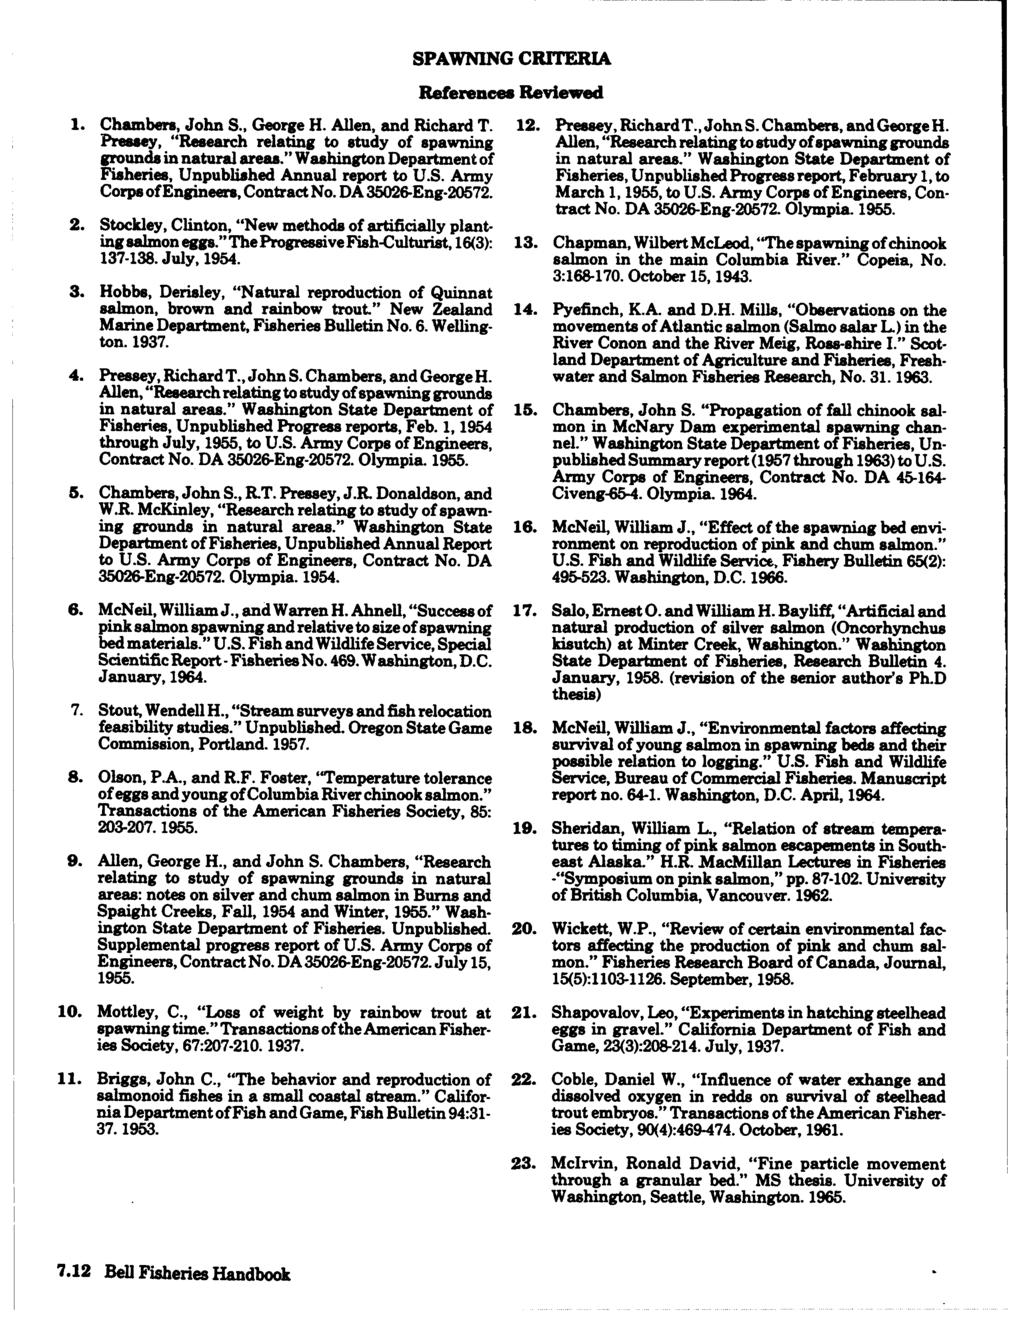 SPAWNING CRITERIA References Reviewed 1. Chambers, John S., George H. Allen, and Richard T. 12. Premey, RichardT., John S. Chambers, andgeorge H.